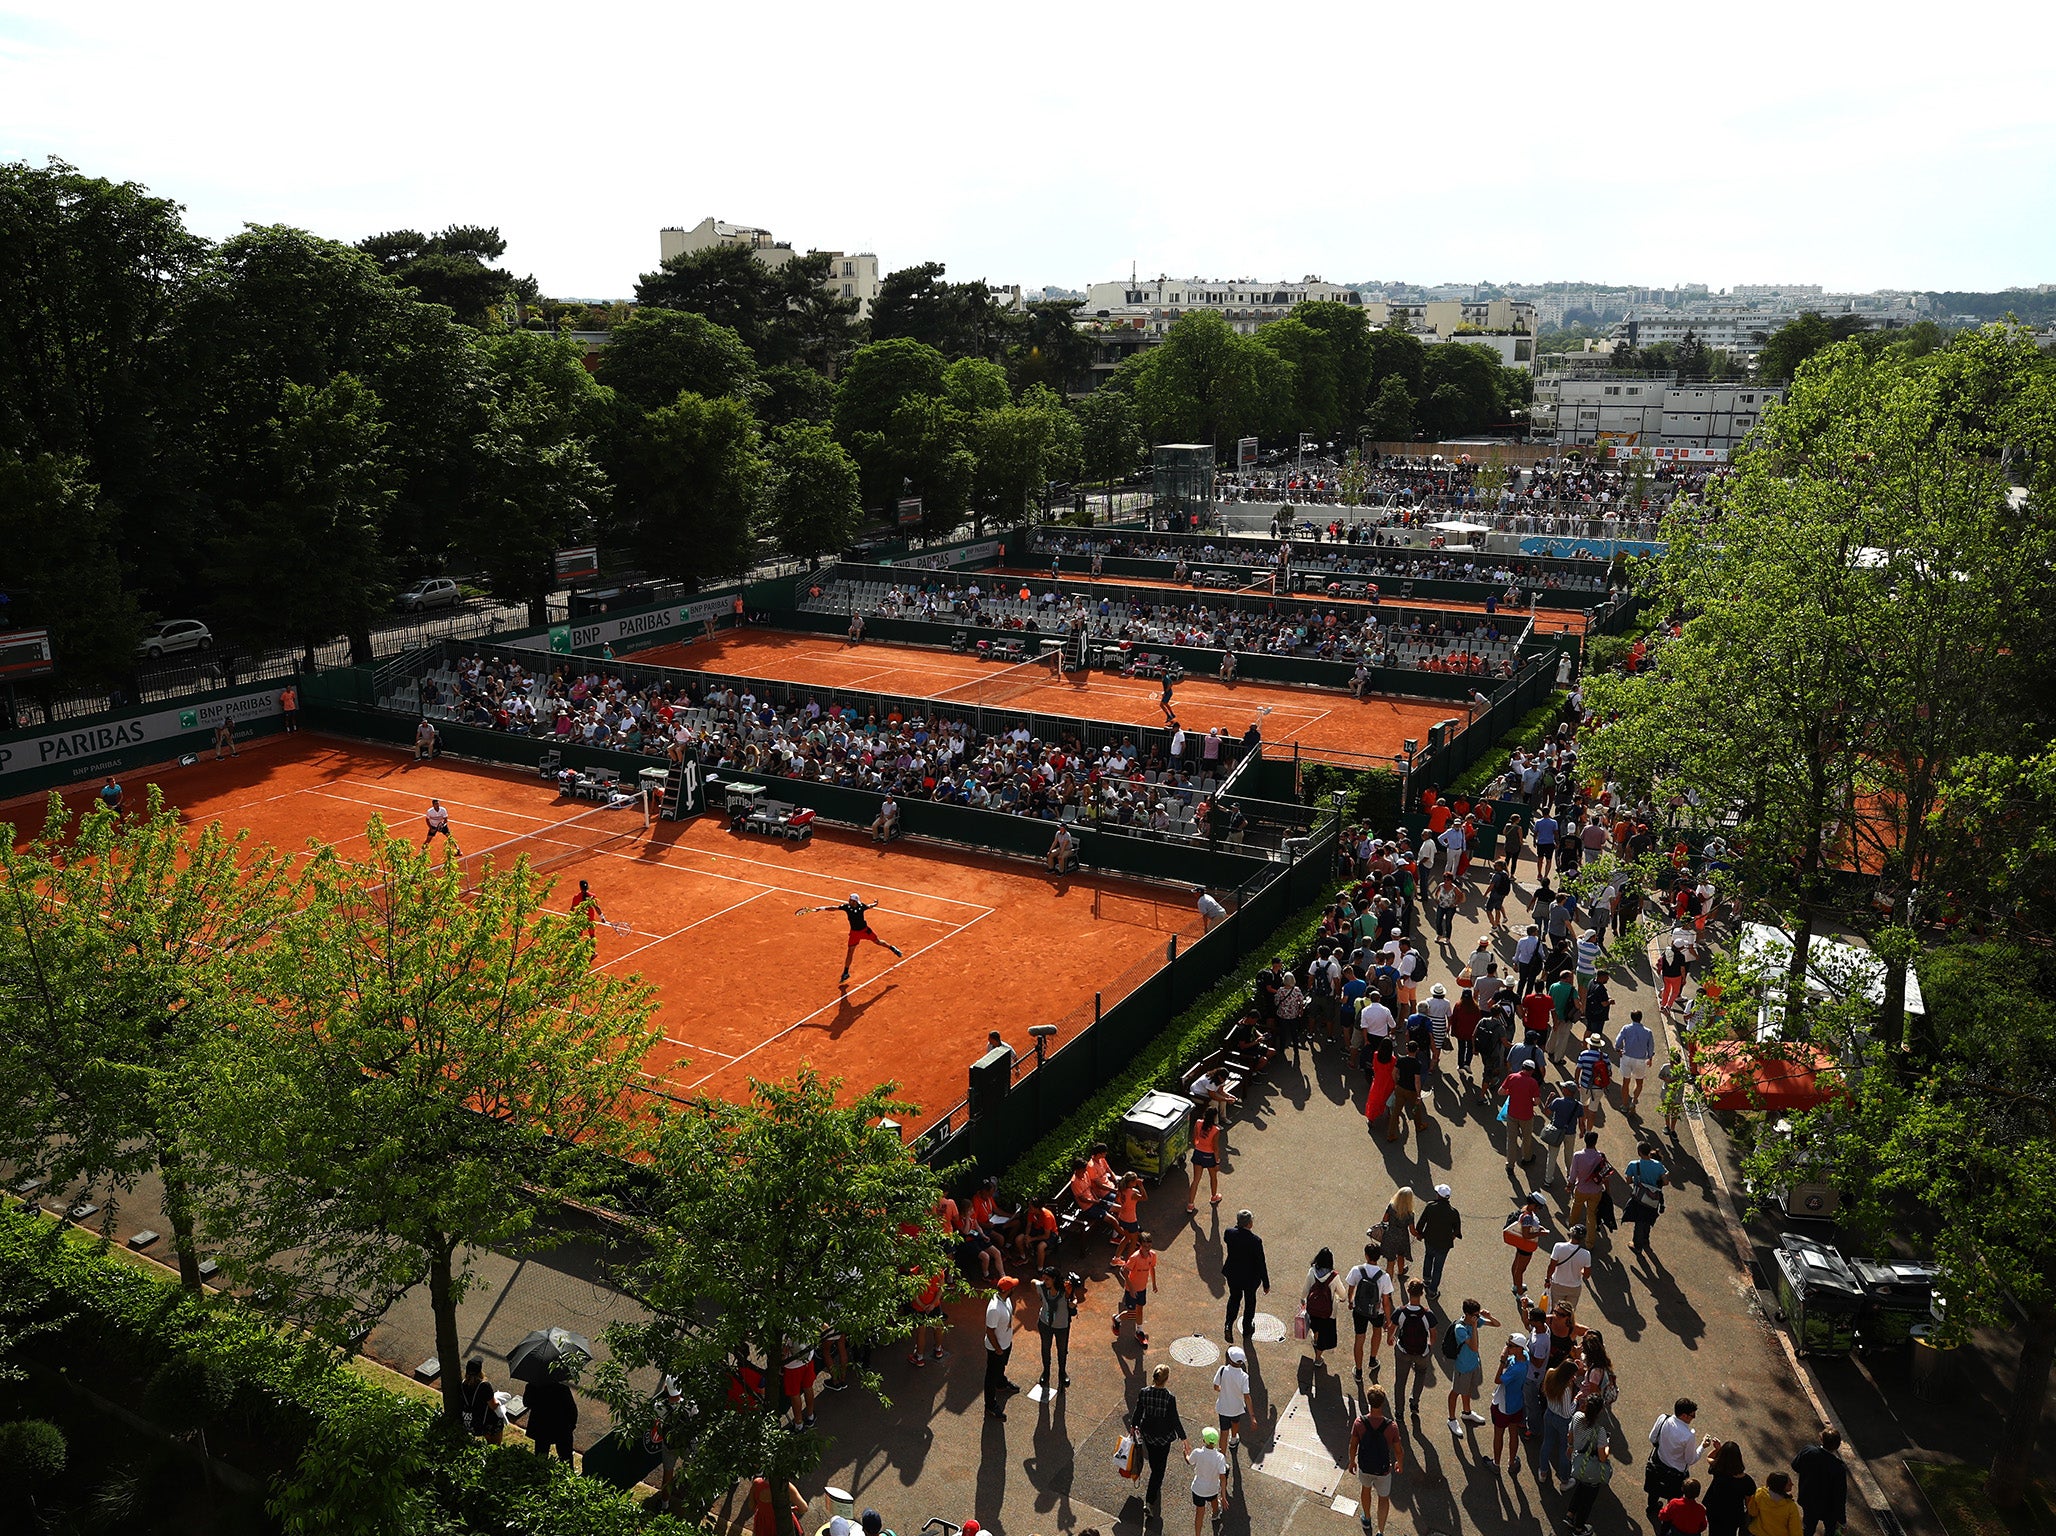 The French Open has come to an end